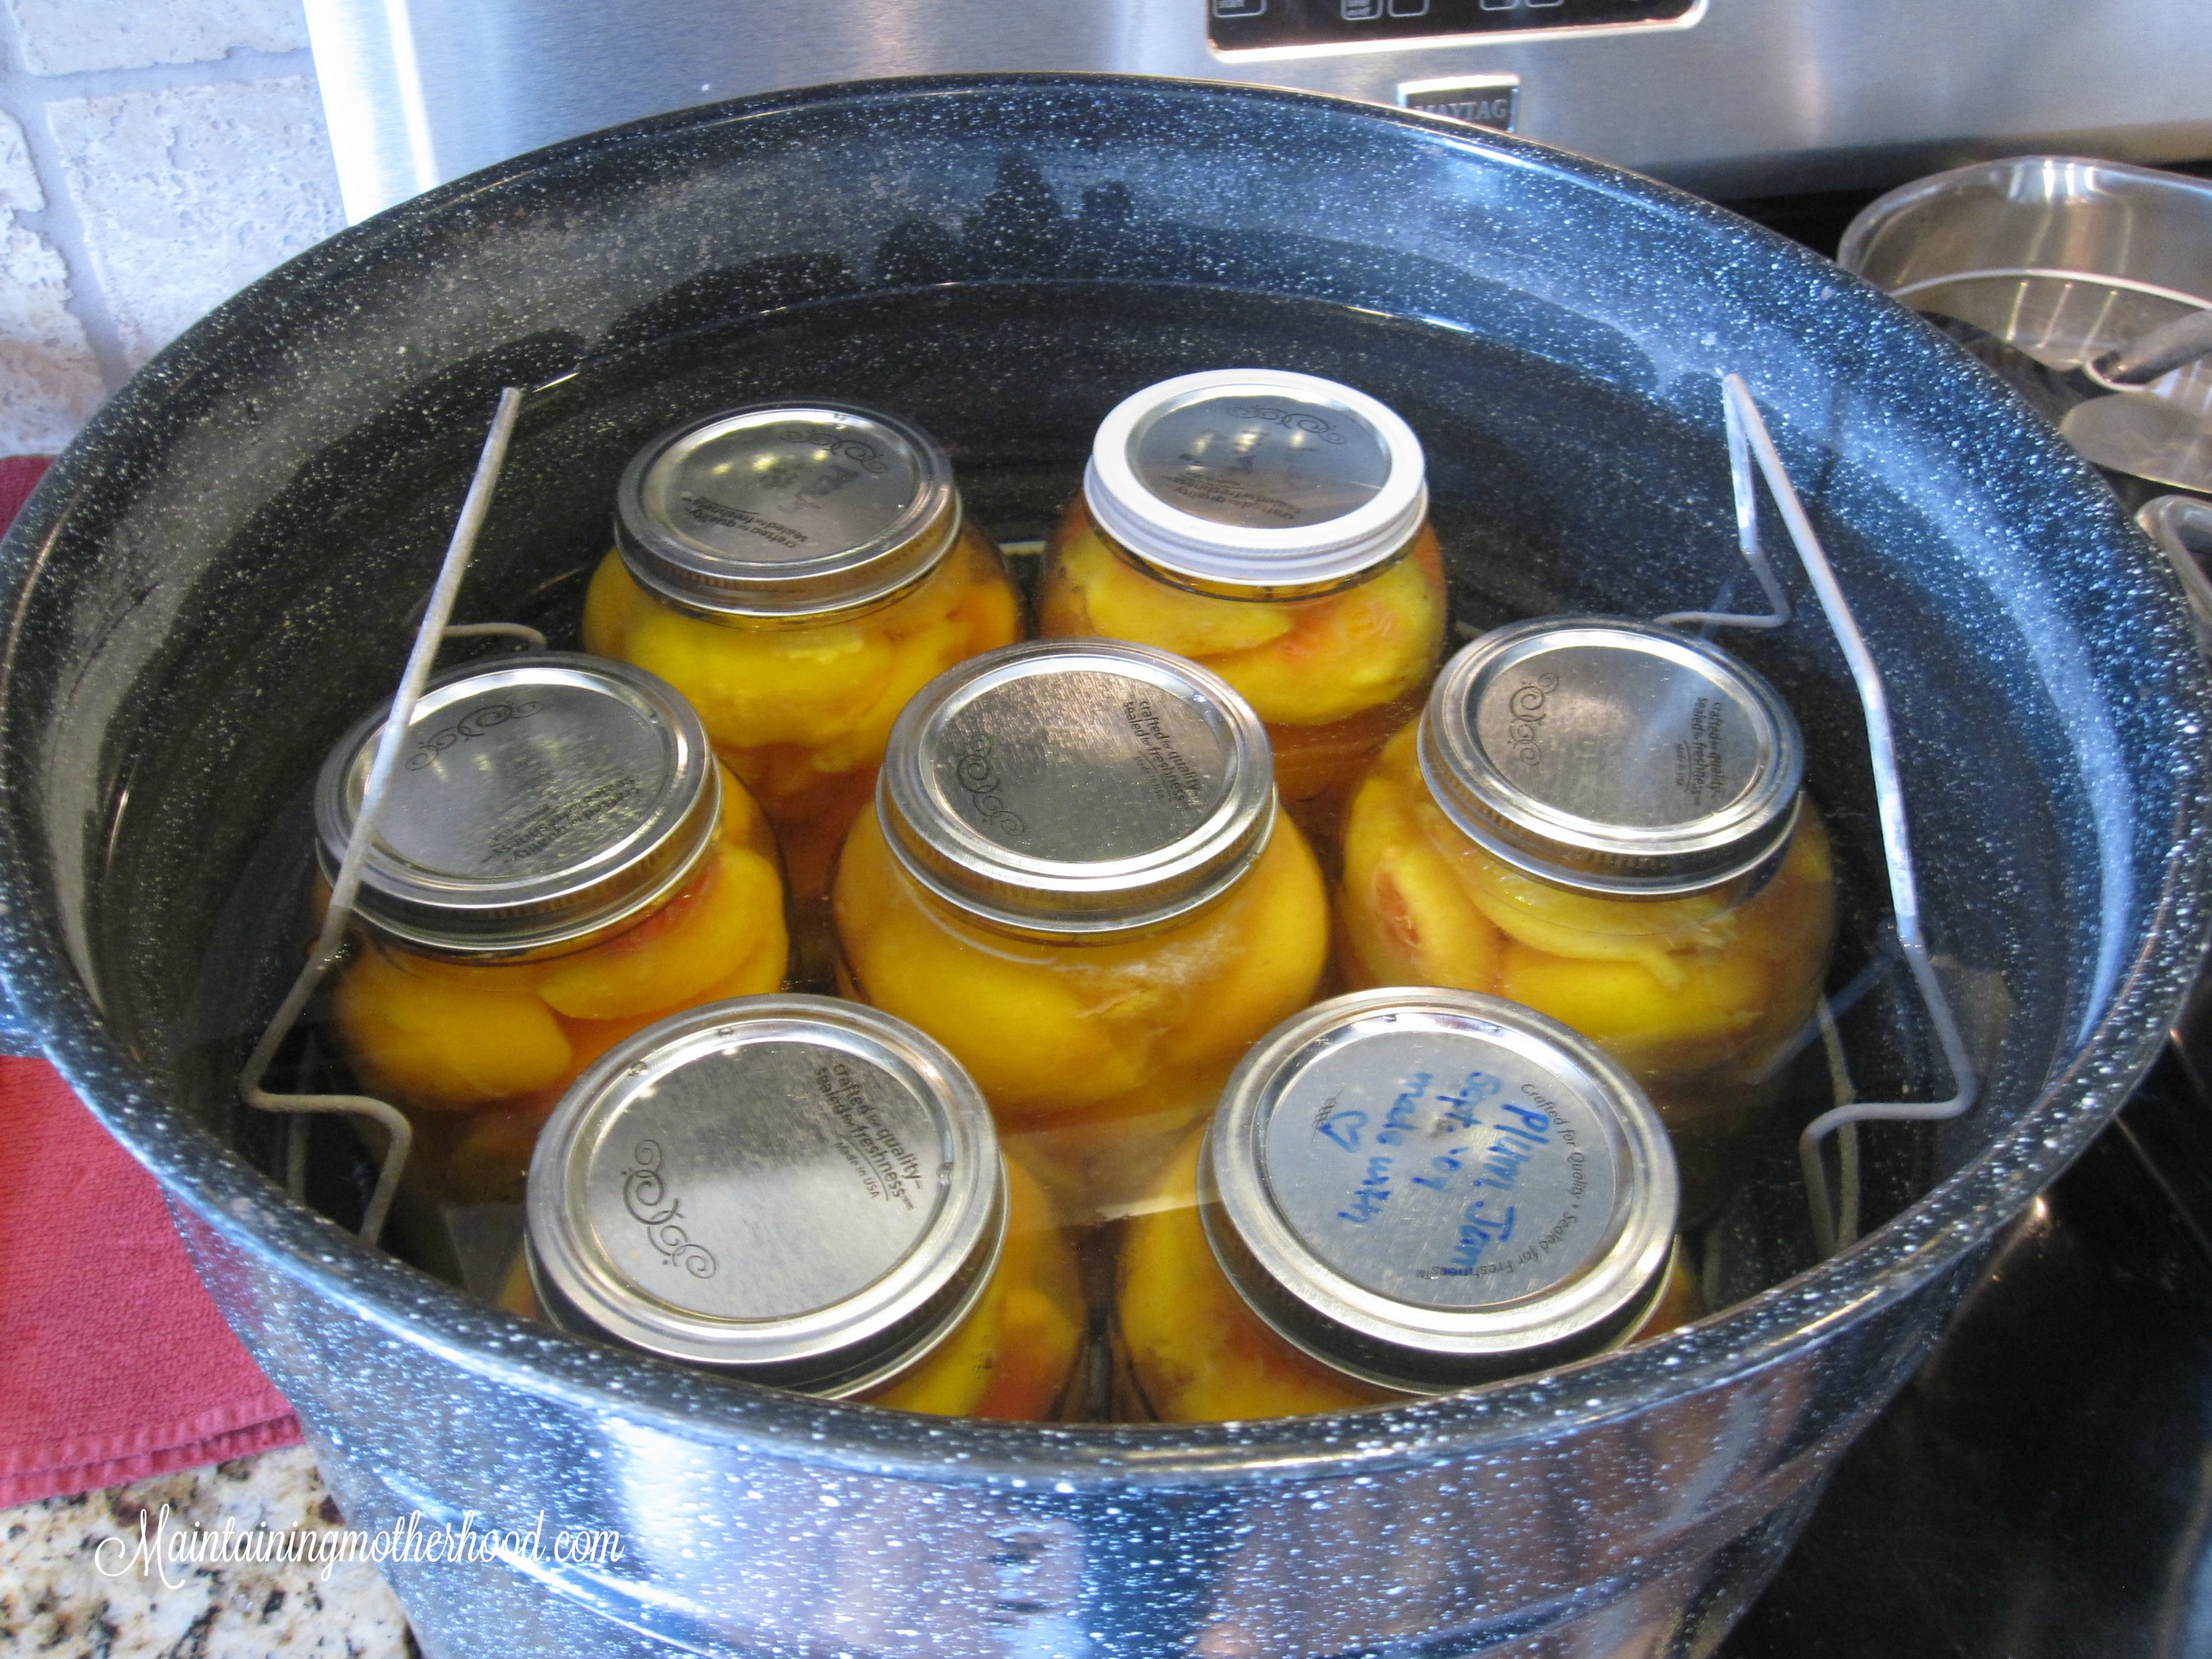 Want to savor the taste of summer all winter long? Enjoy canned peaches even after peach season. Learn how to can peaches In 10 simple steps.